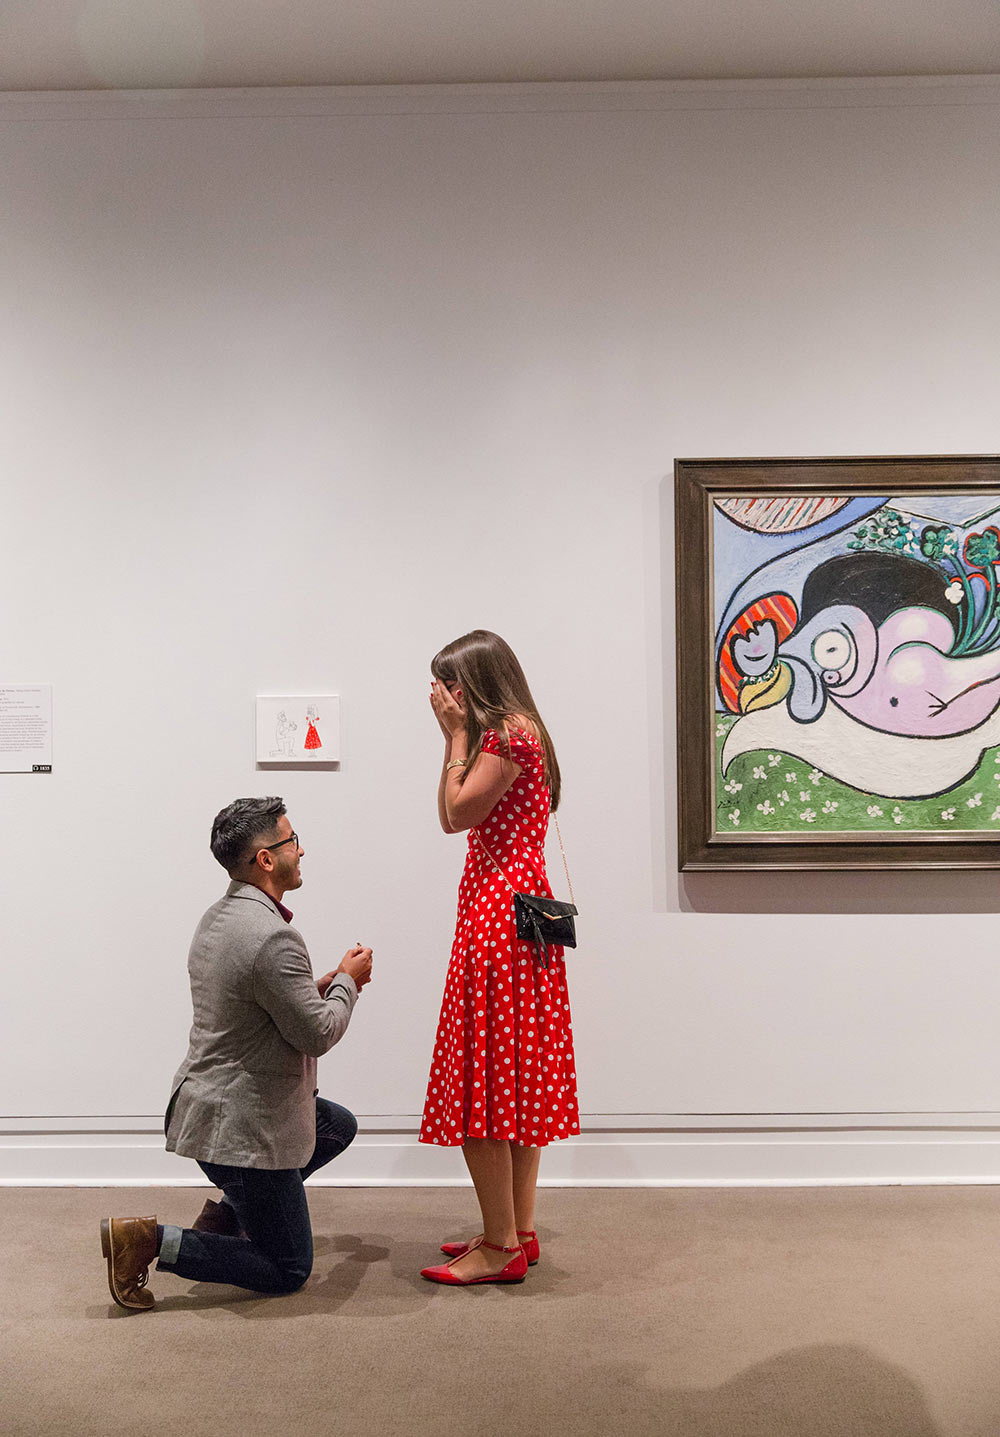 I proposed to my girlfriend by hanging a painting in the Met